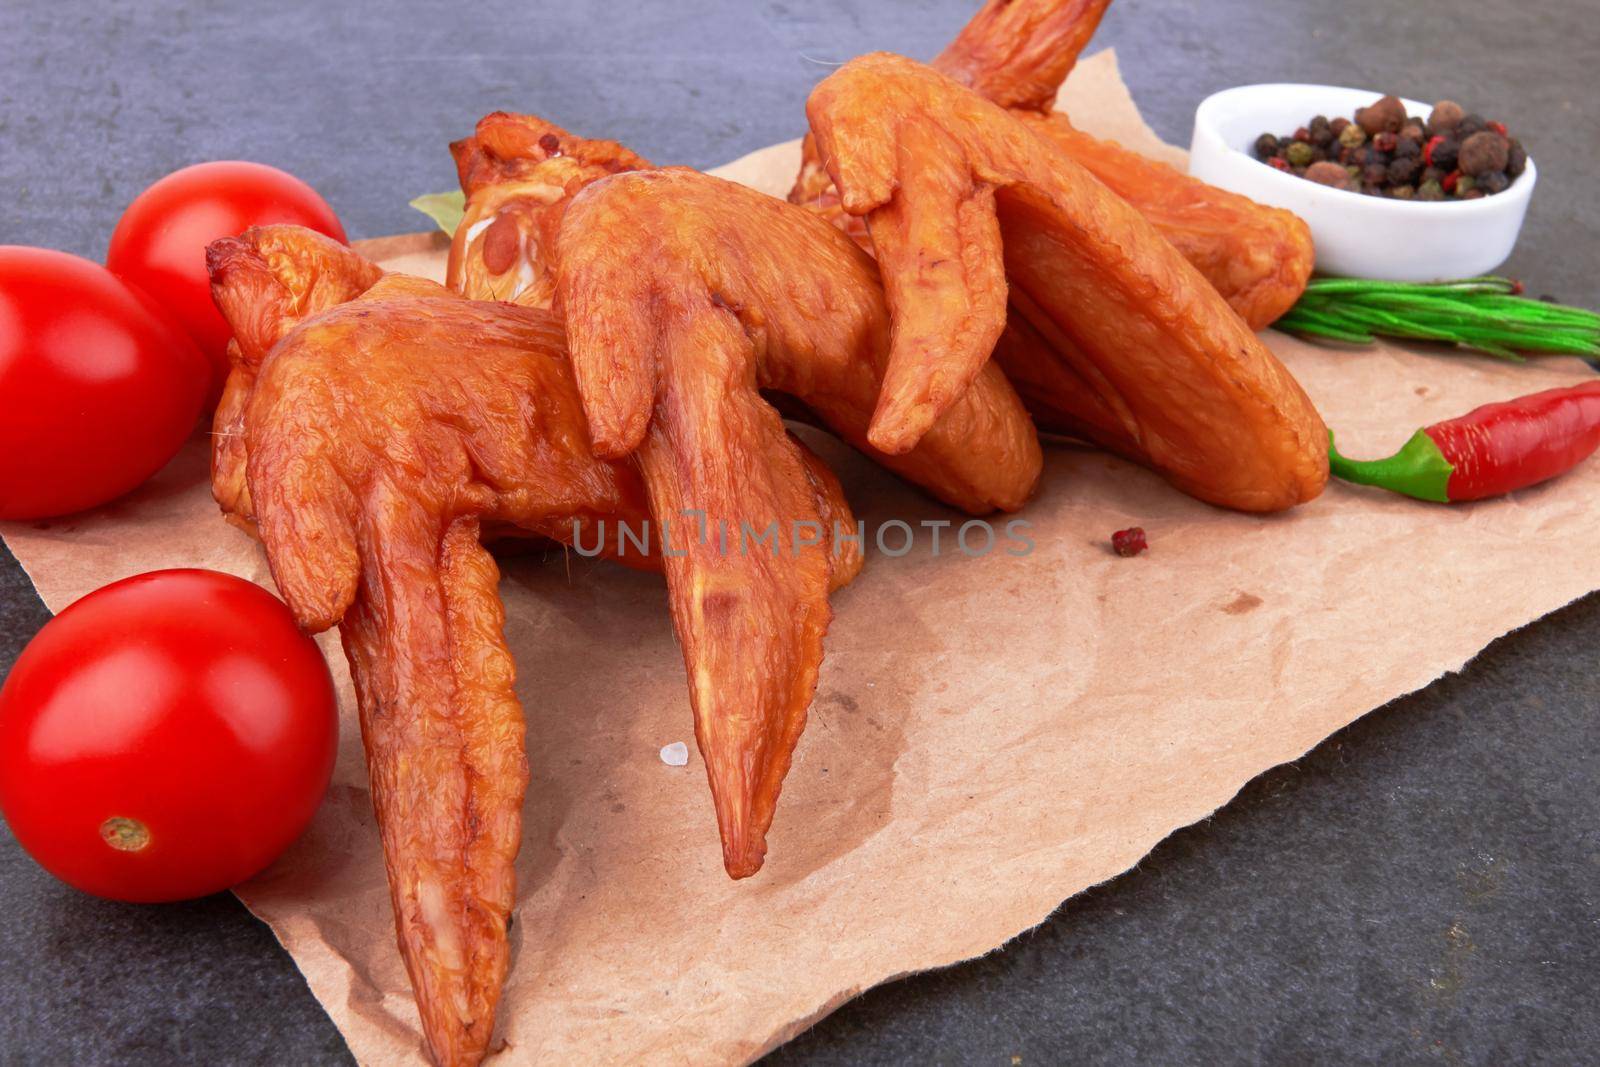 Smoked chicken wings by pioneer111